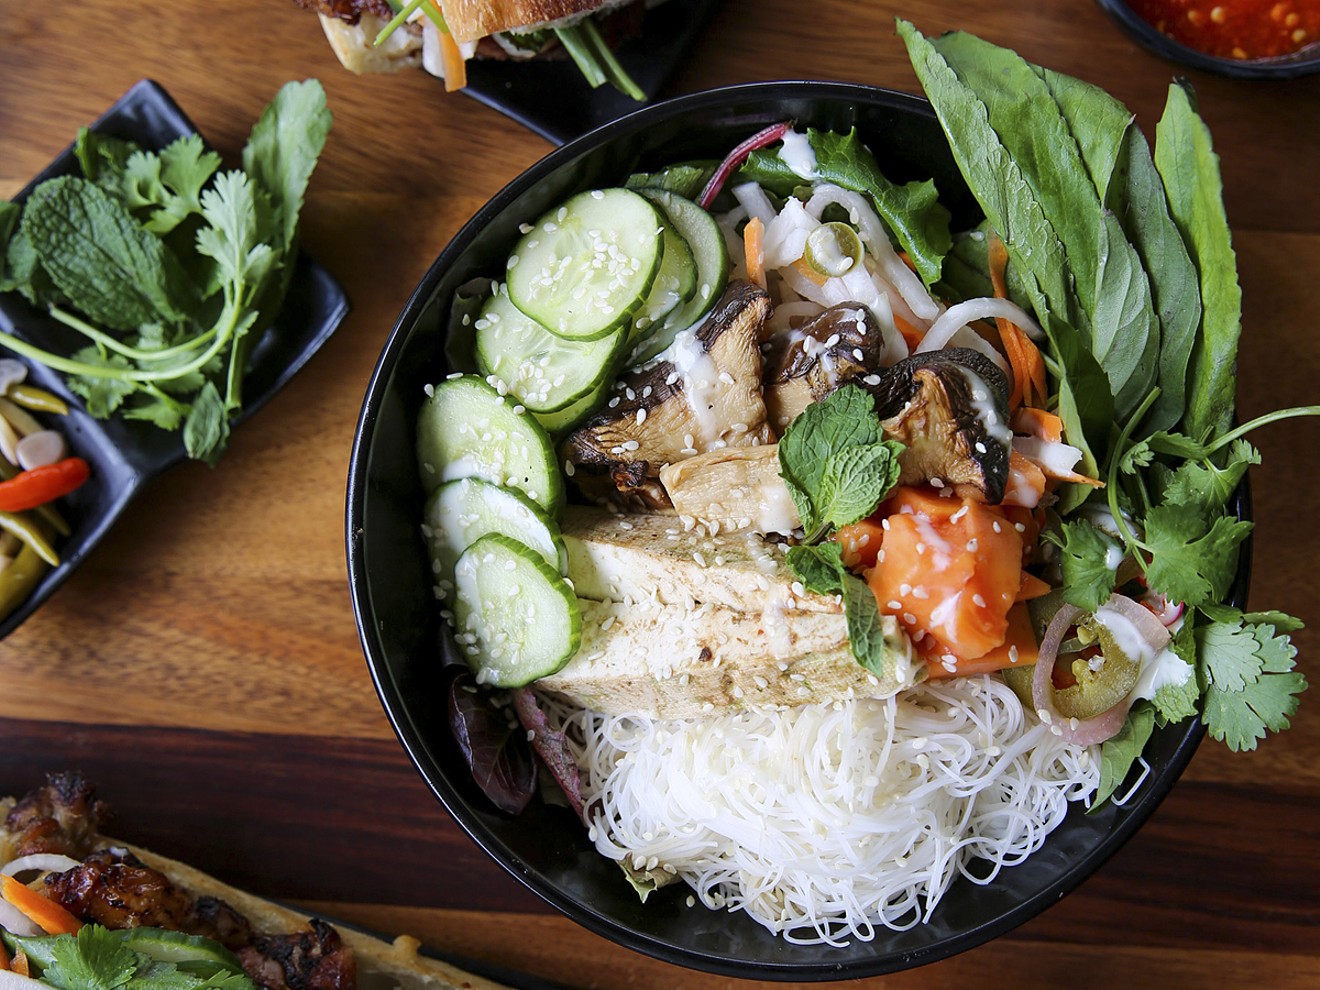 Les Banh Amis, from the executive chef of Coyo Taco, serves Vietnamese-style fare.